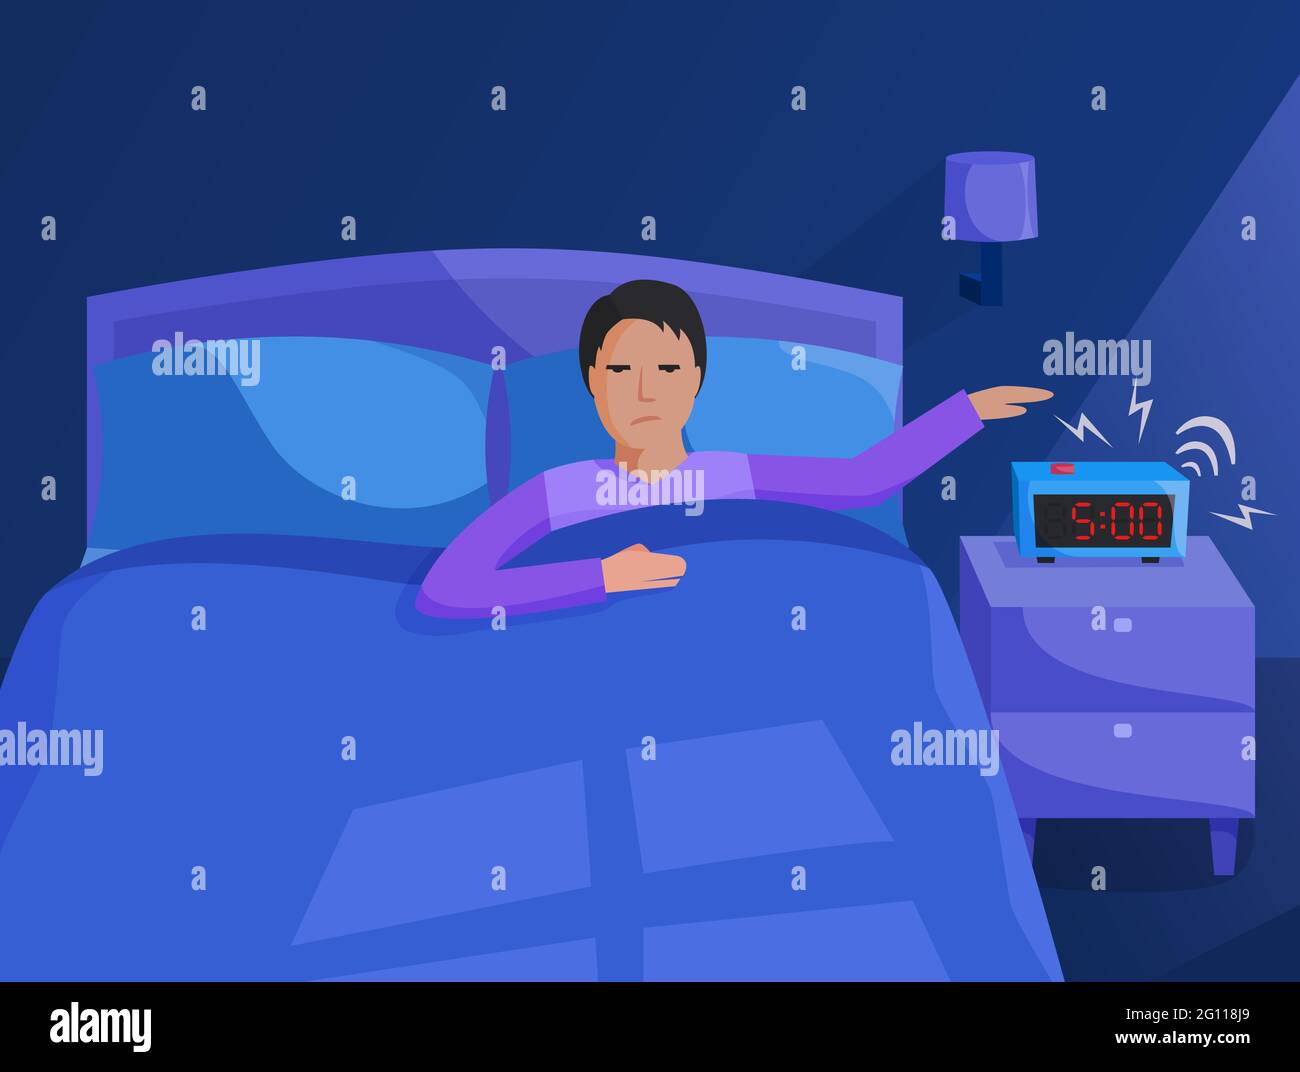 Person in bed waking up early, bedroom interior at early morning, alarm clock ringing, flat style. Vector illustration Stock Vector